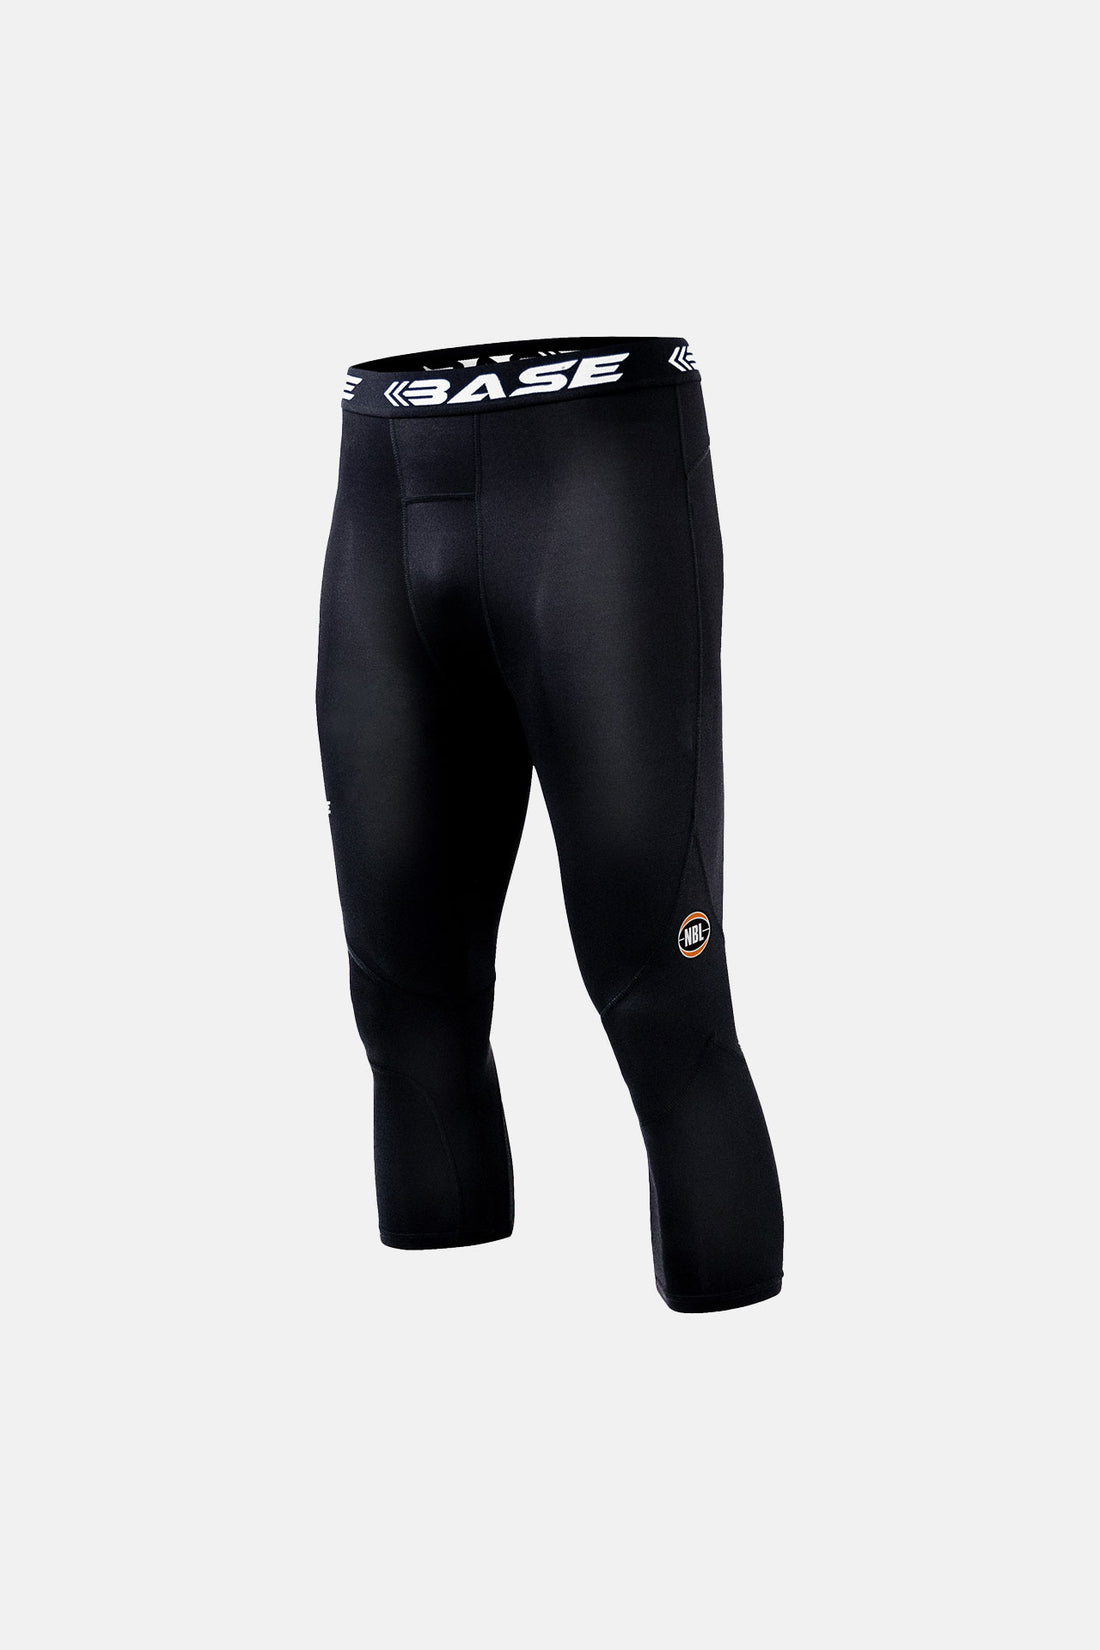 Skins A400 Youth Compression Long Tights (Black) | BRAND NEW